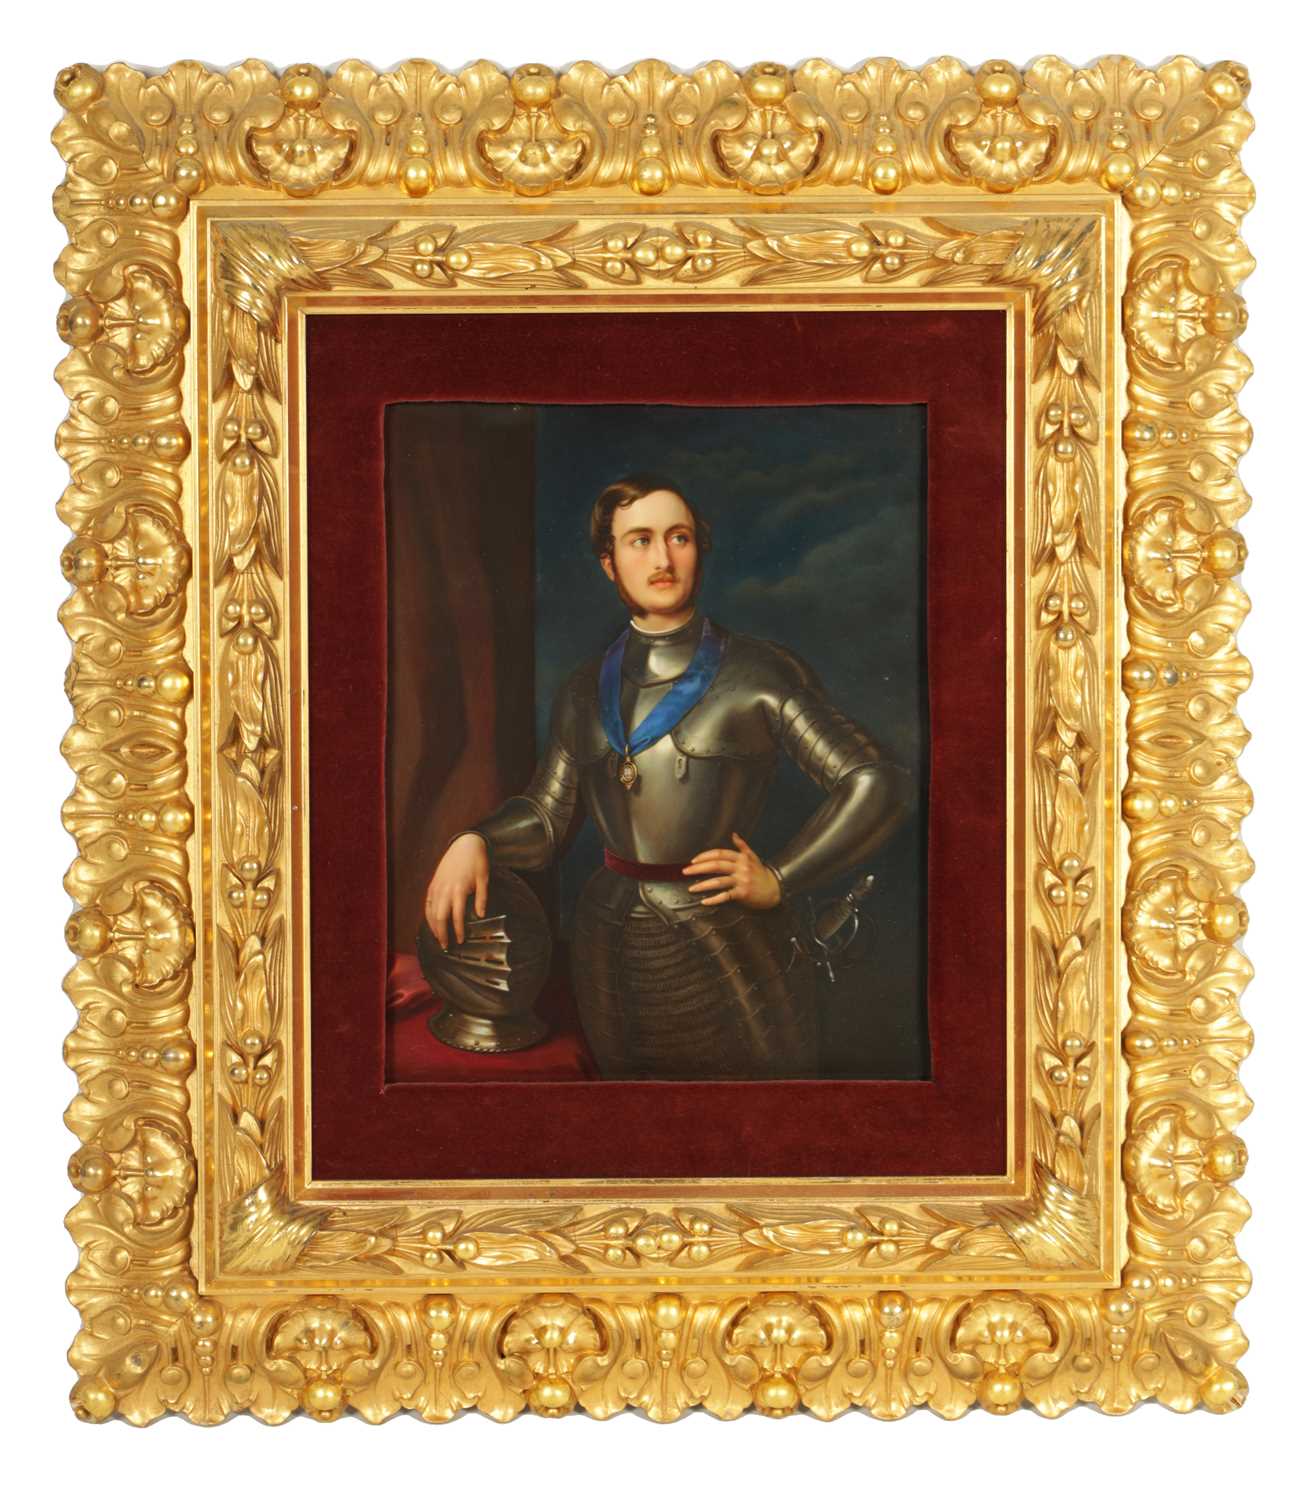 A LARGE 19TH CENTURY GERMAN PAINTED PORCELAIN PLAQUE OF PRINCE ALBERT